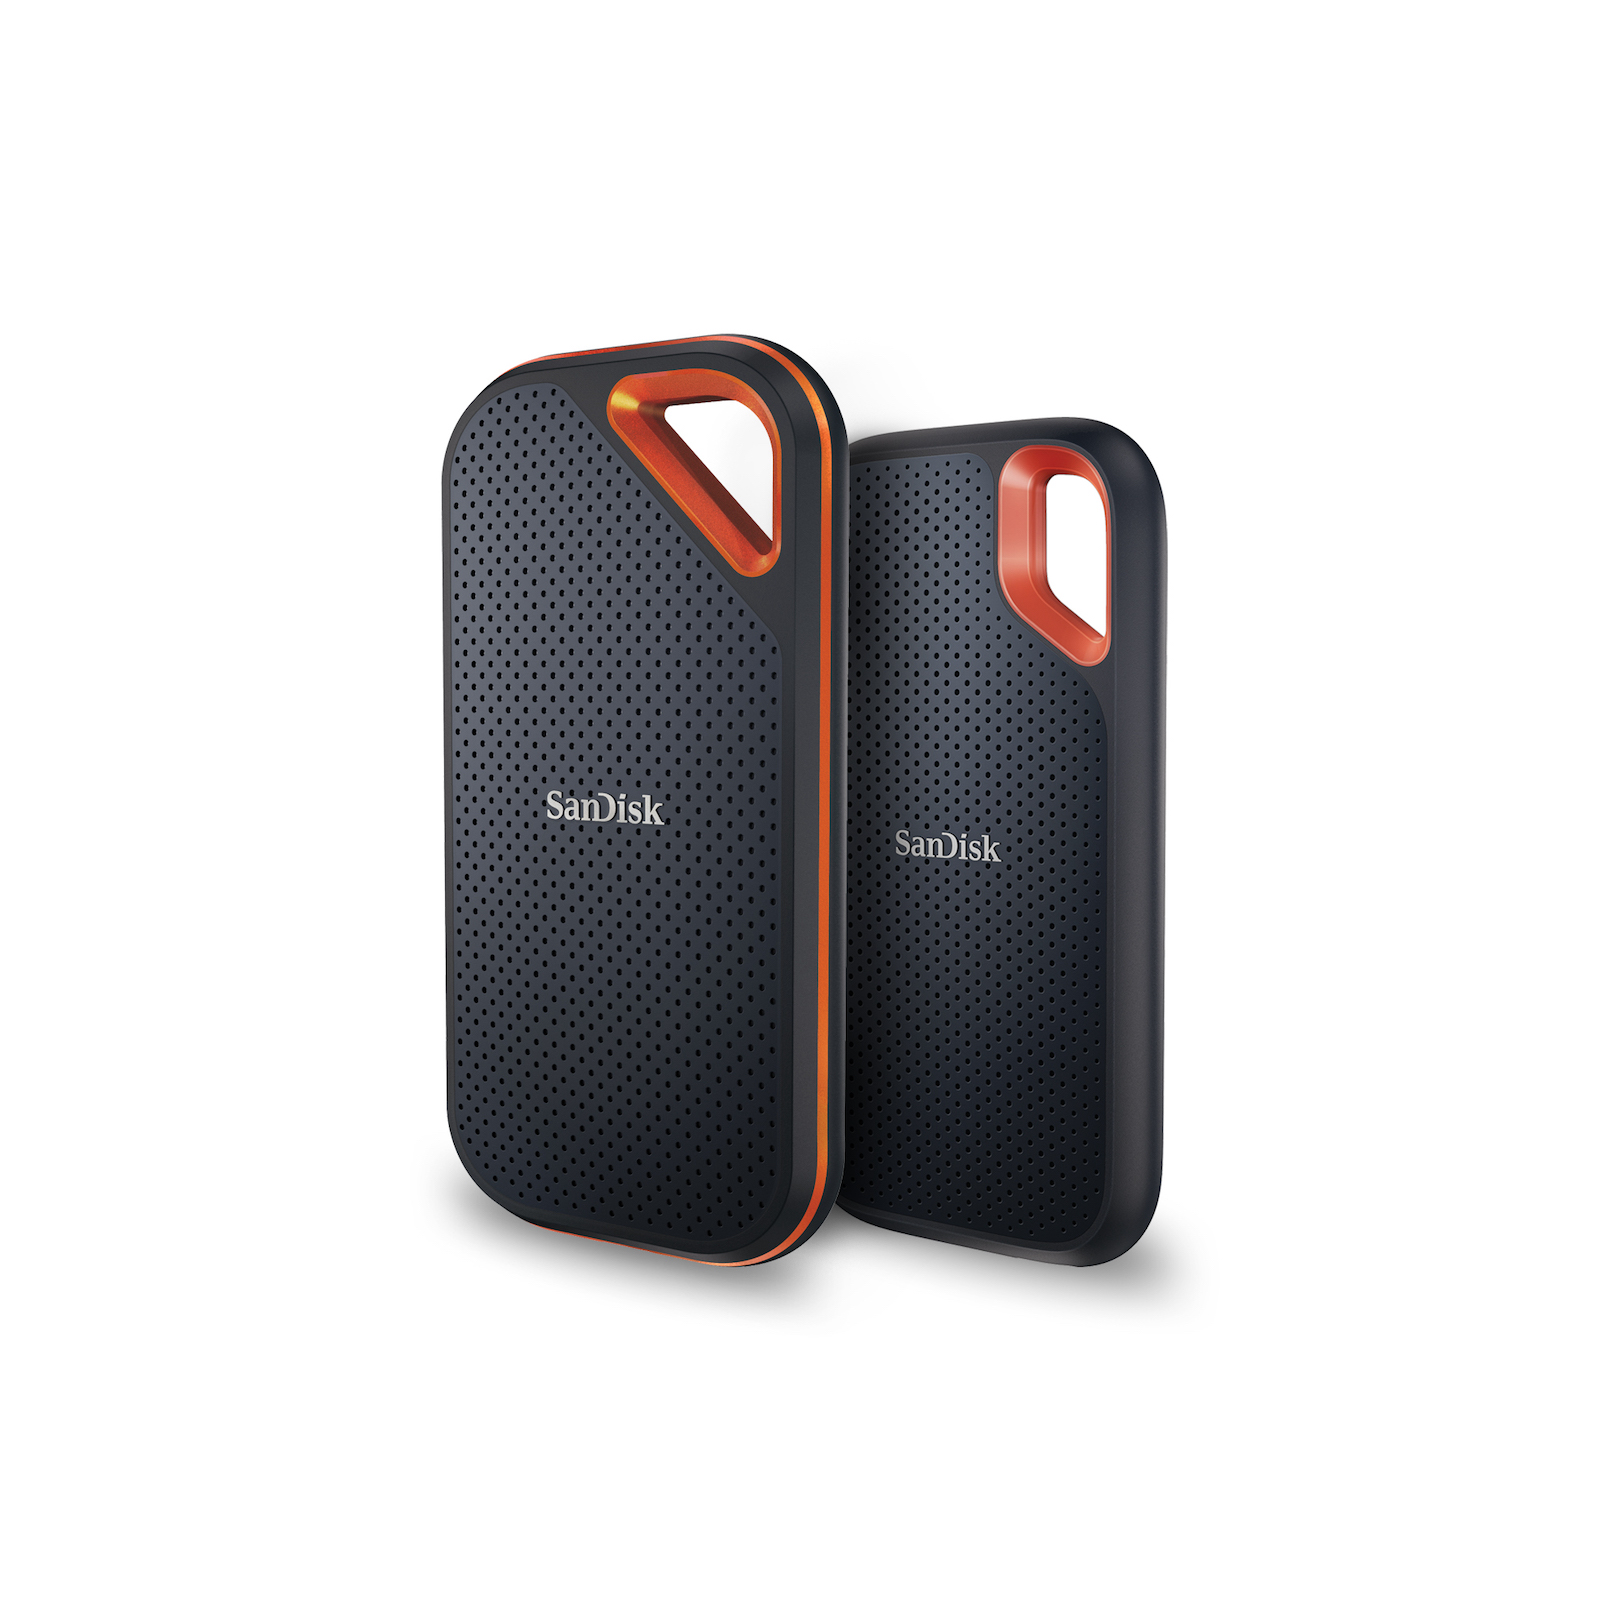 SanDisk Extreme - Extreme Pro Portable SSDs